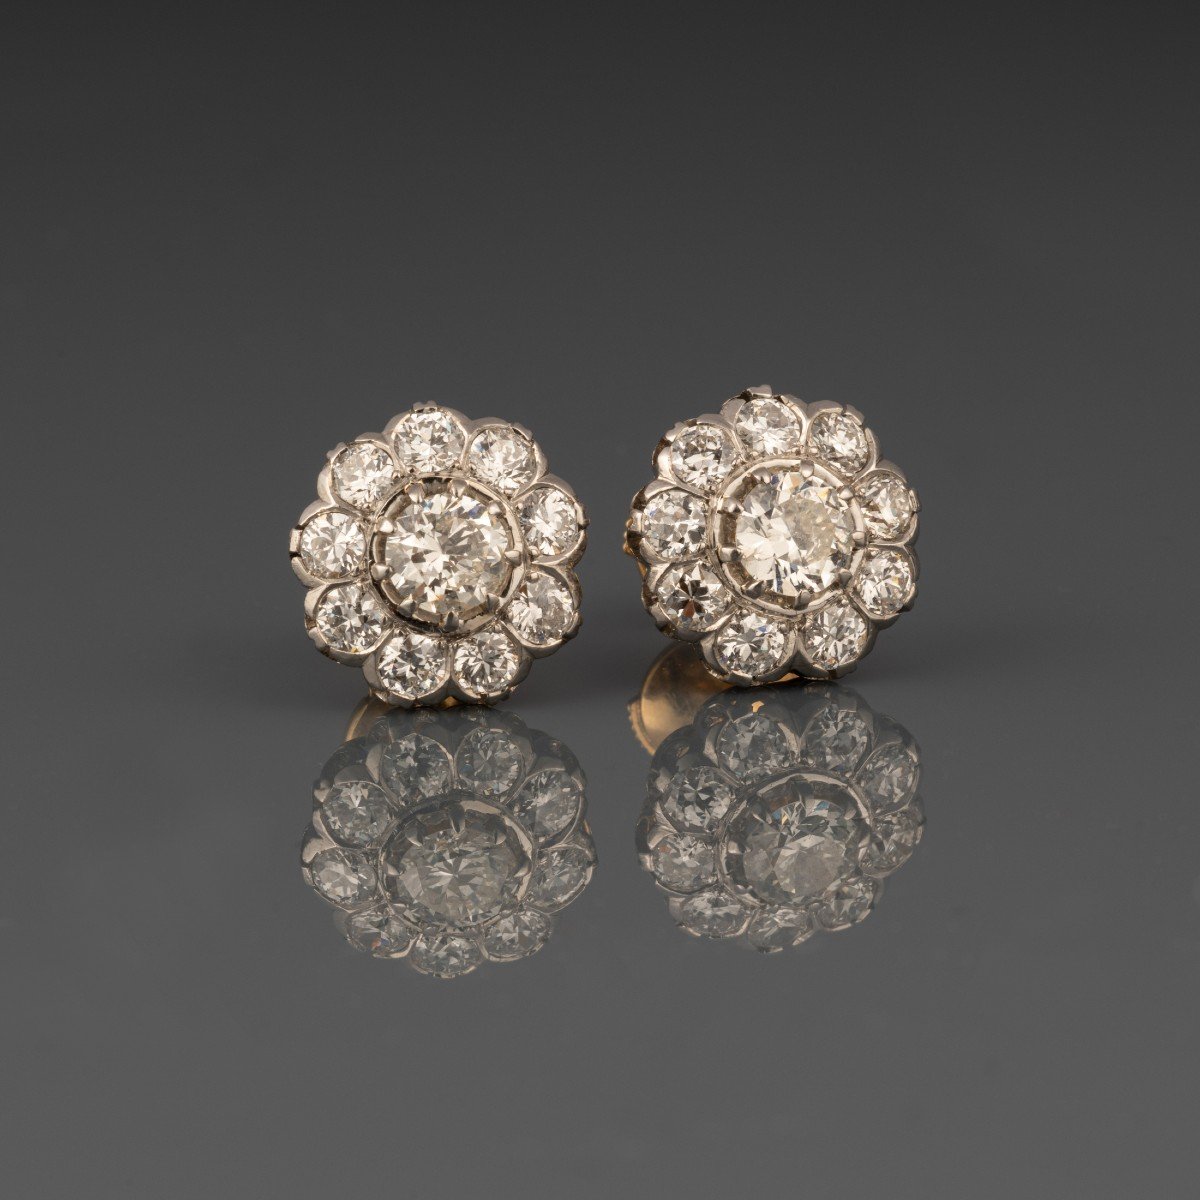 Antique Earrings In Platinum Gold And 3 Carats Of Diamonds-photo-4